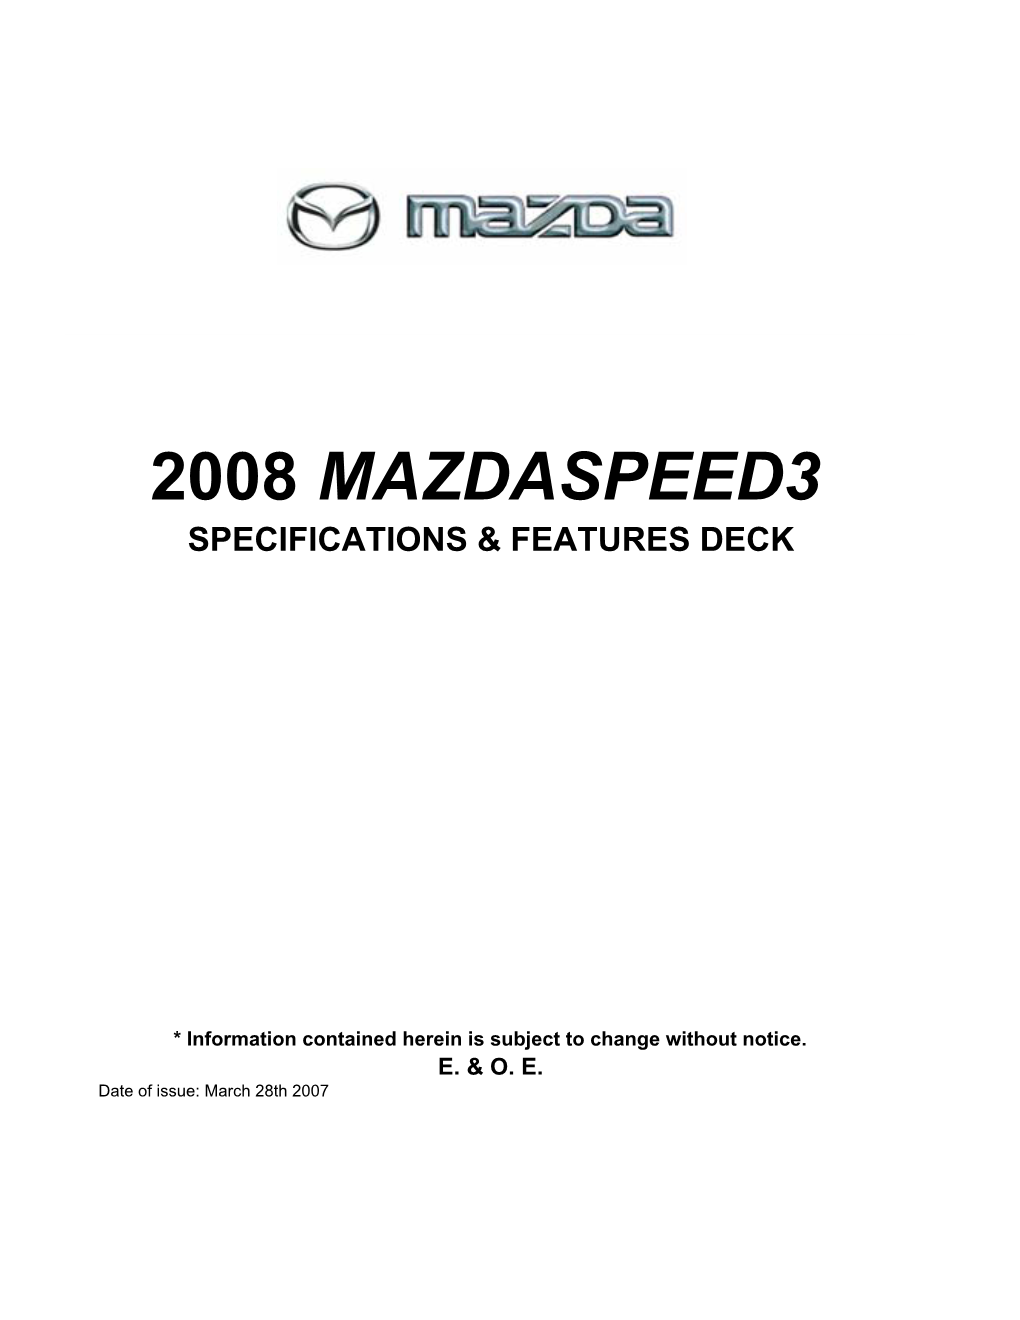 2008 MAZDASPEED3 Specifications and Features